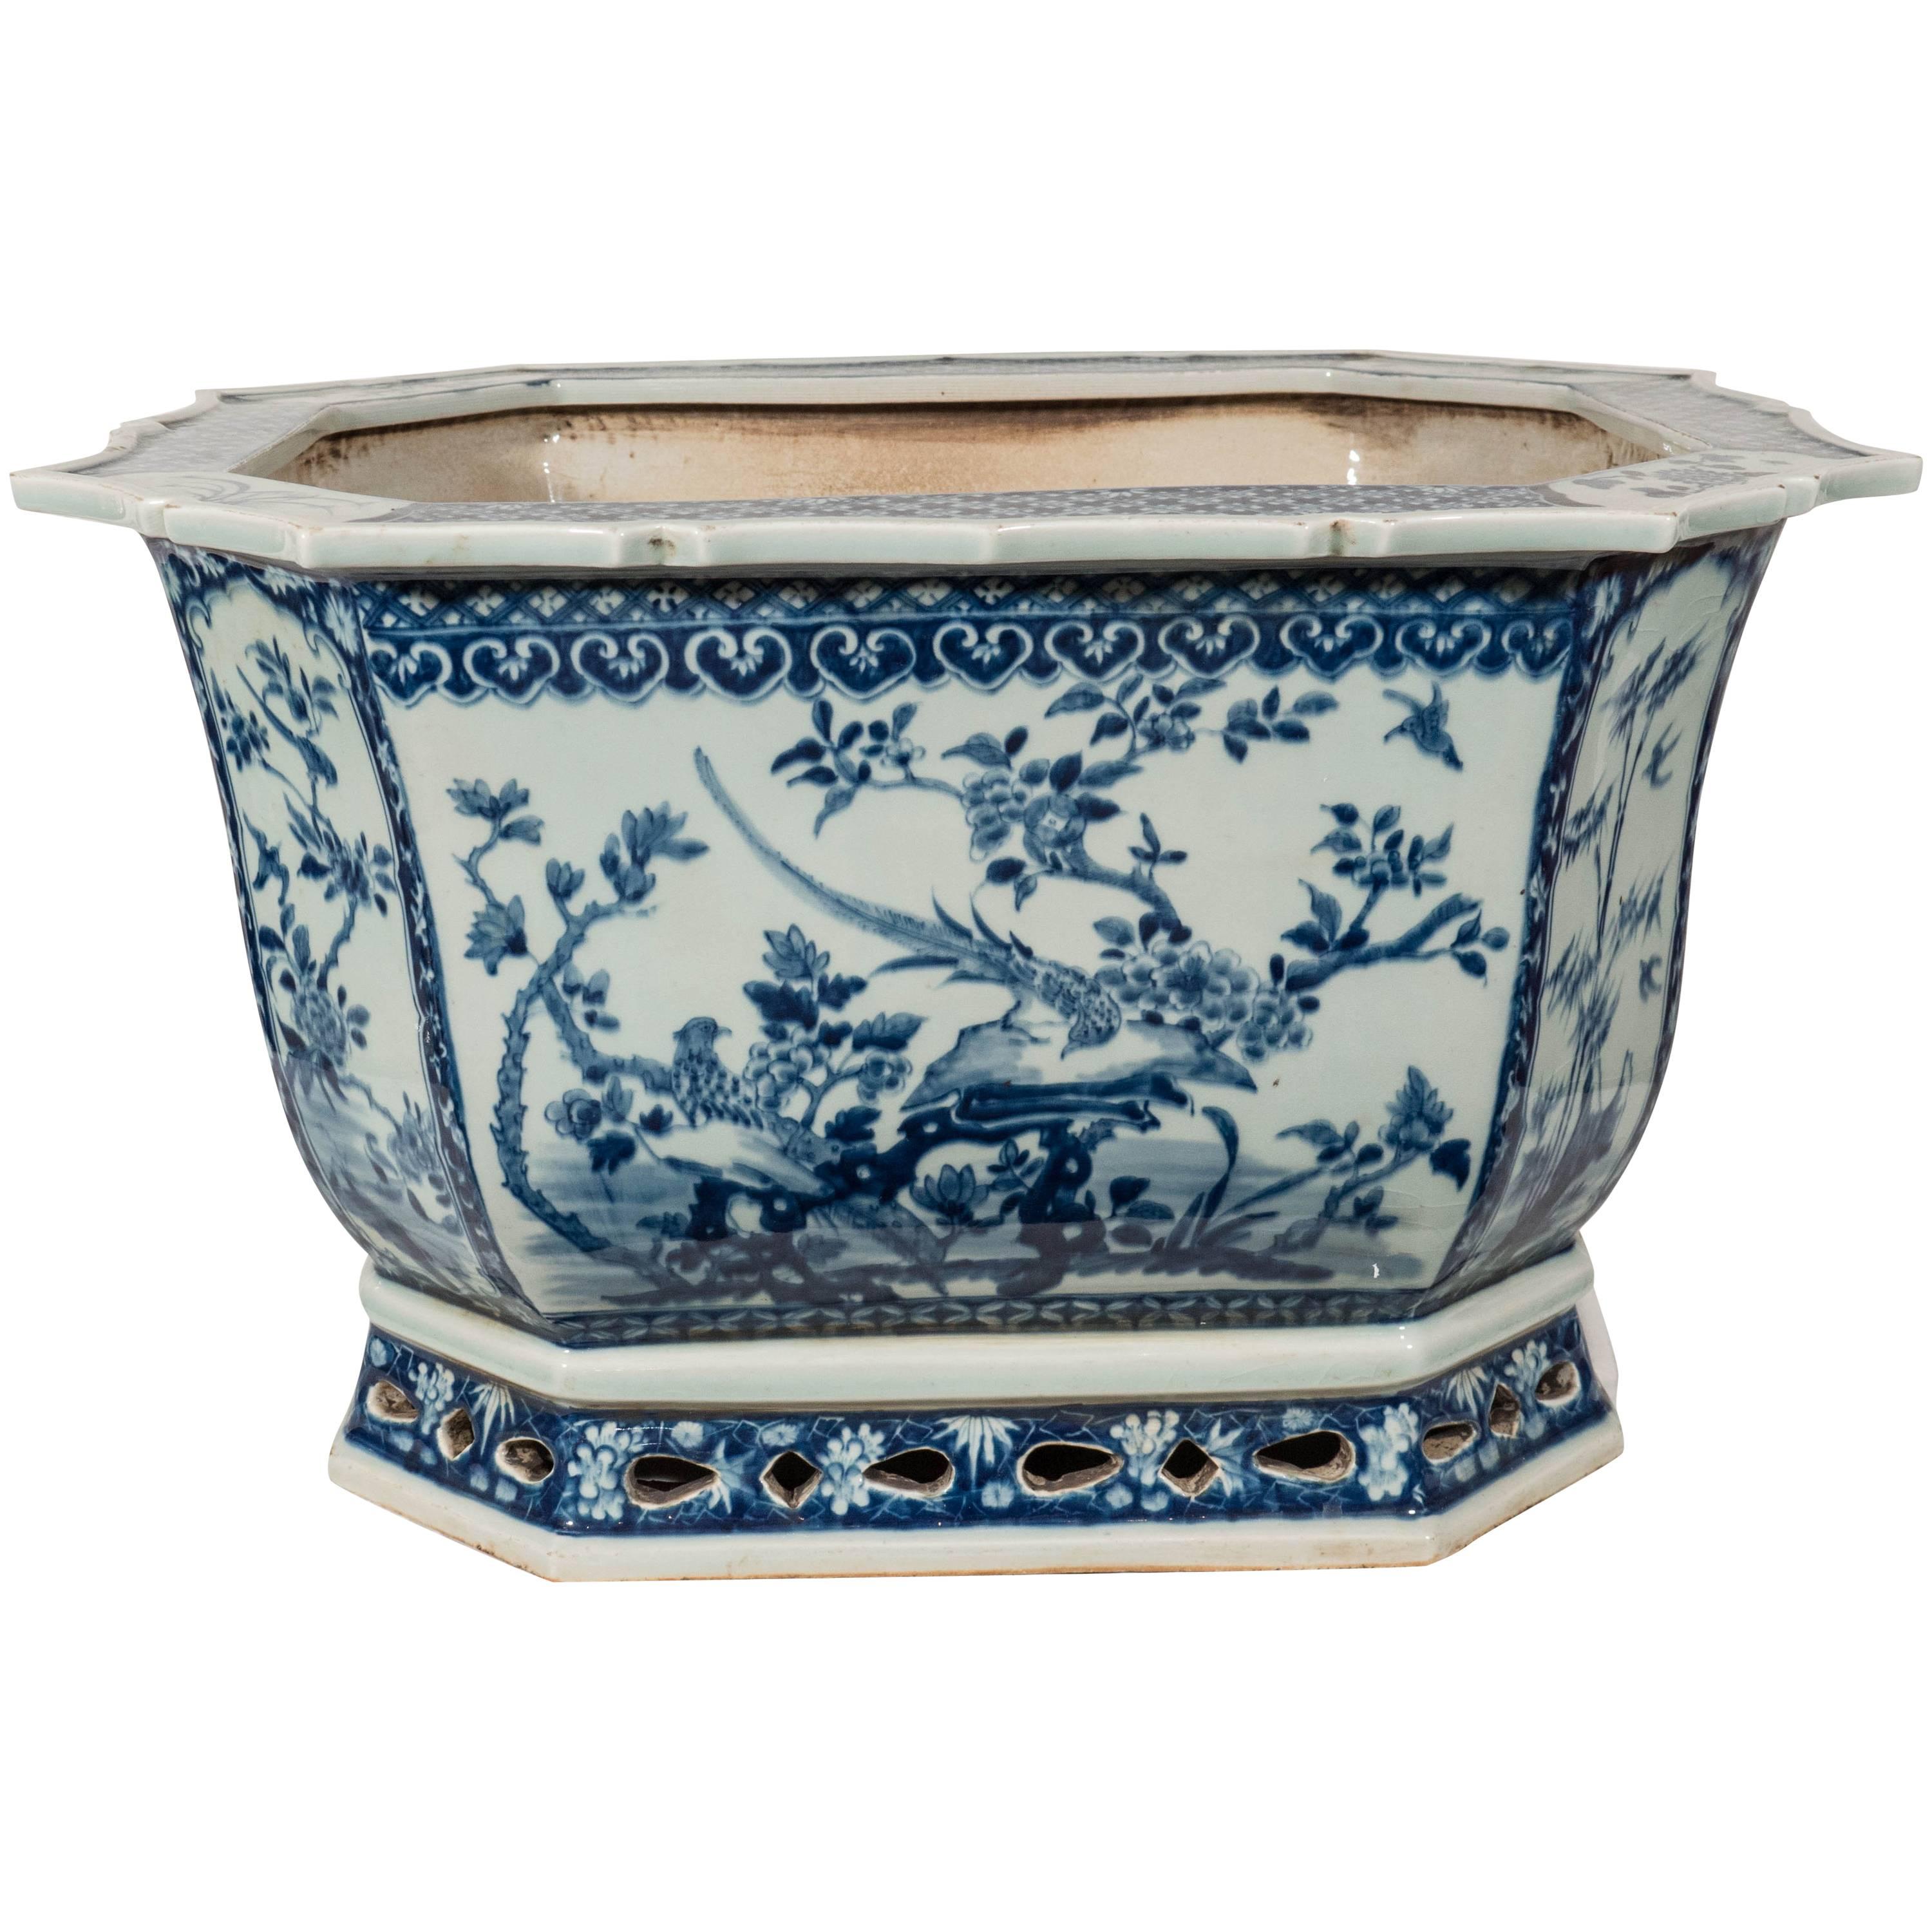 A Chinese Porcelain Blue and White Planter